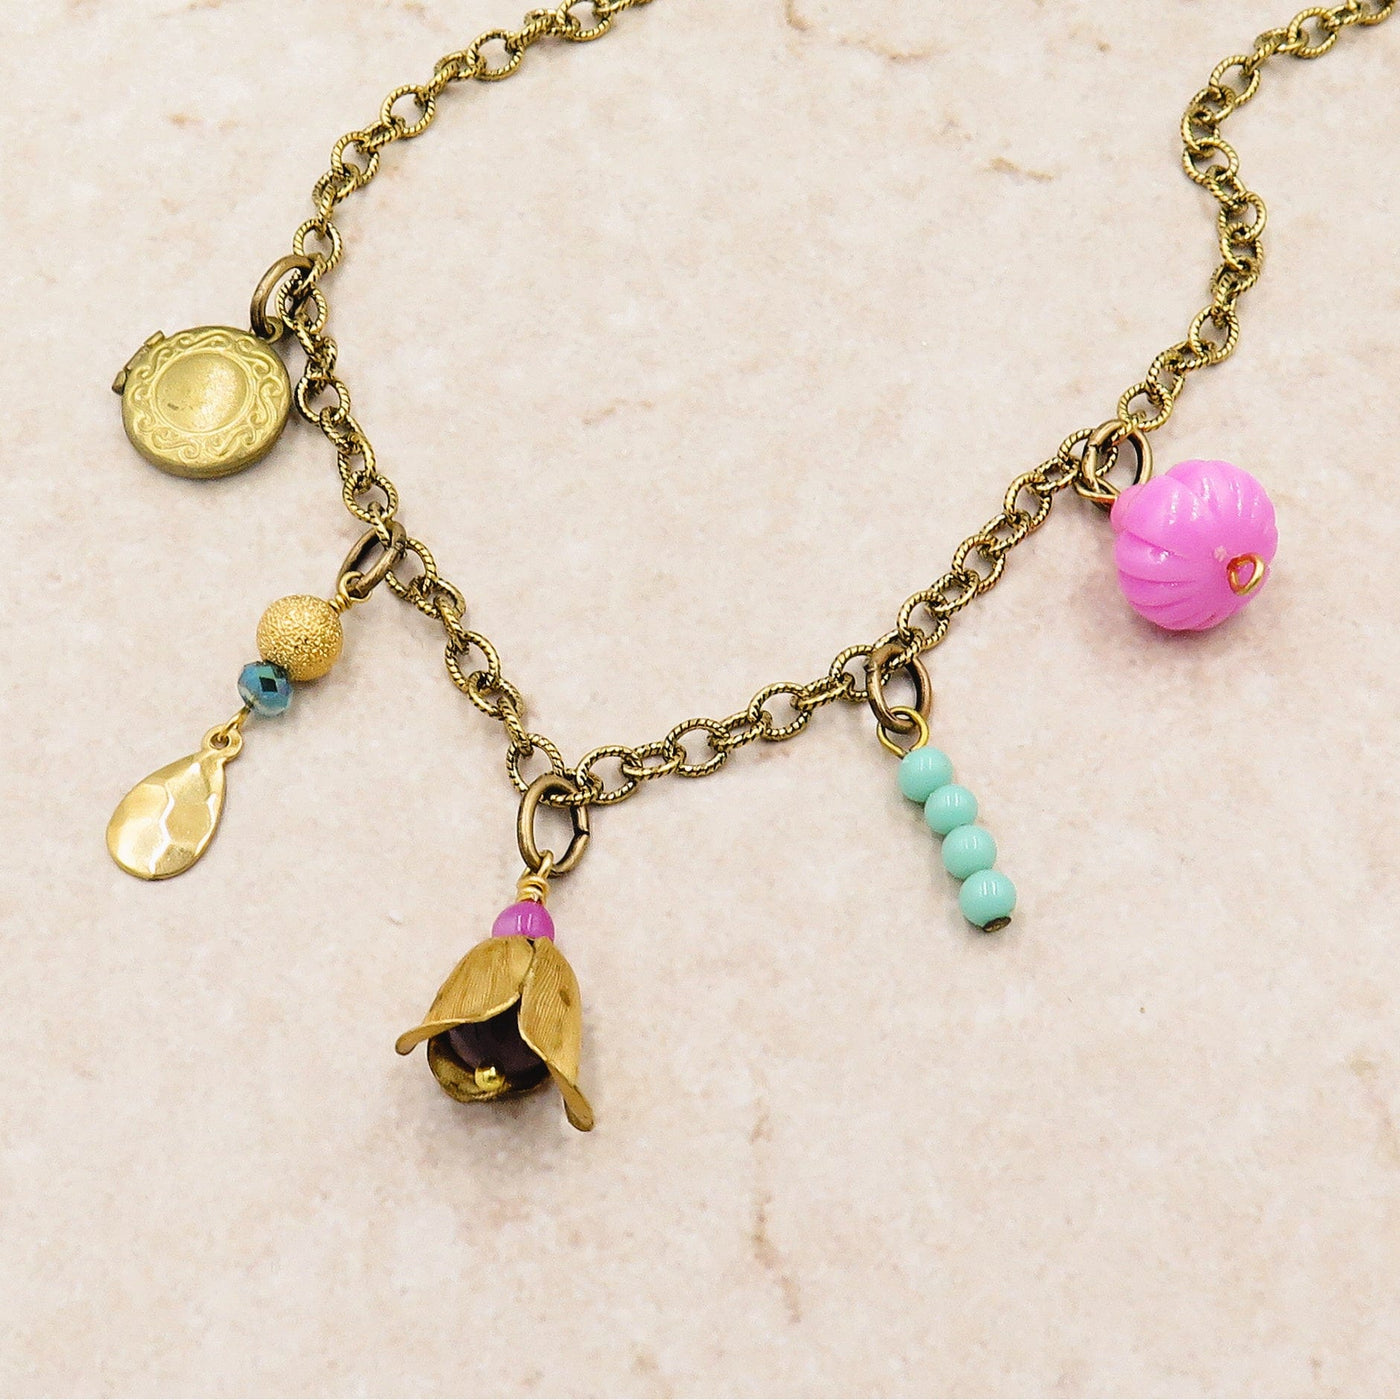 Whimsical Charm Choker Necklace Multicolored Beads